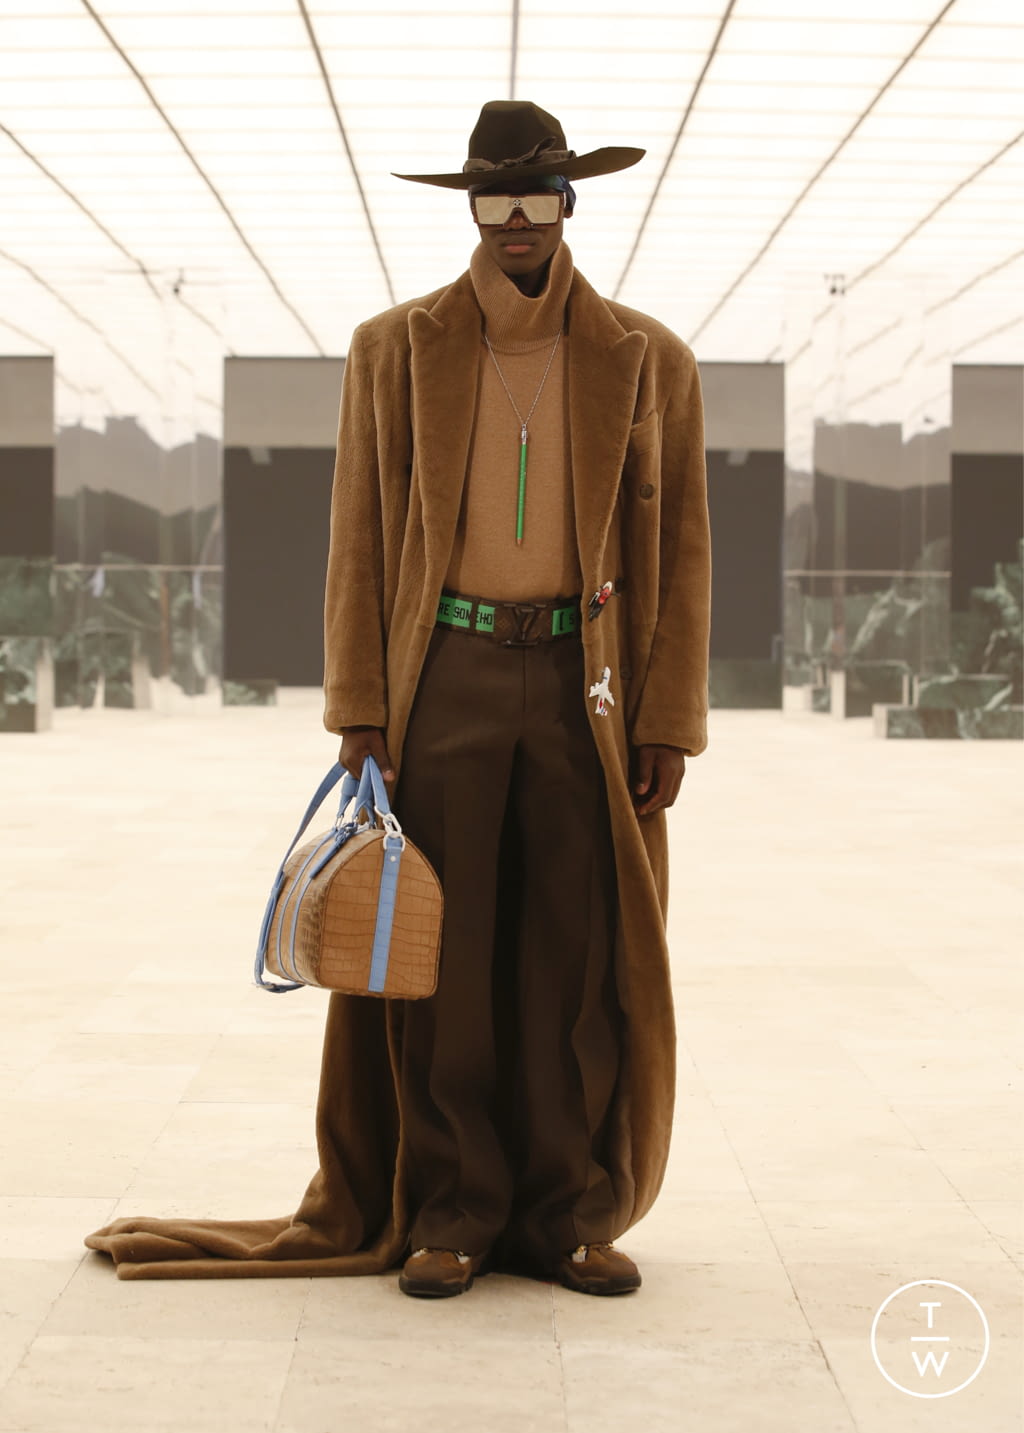 See Louis Vuitton's Fall/Winter 2021 Collection